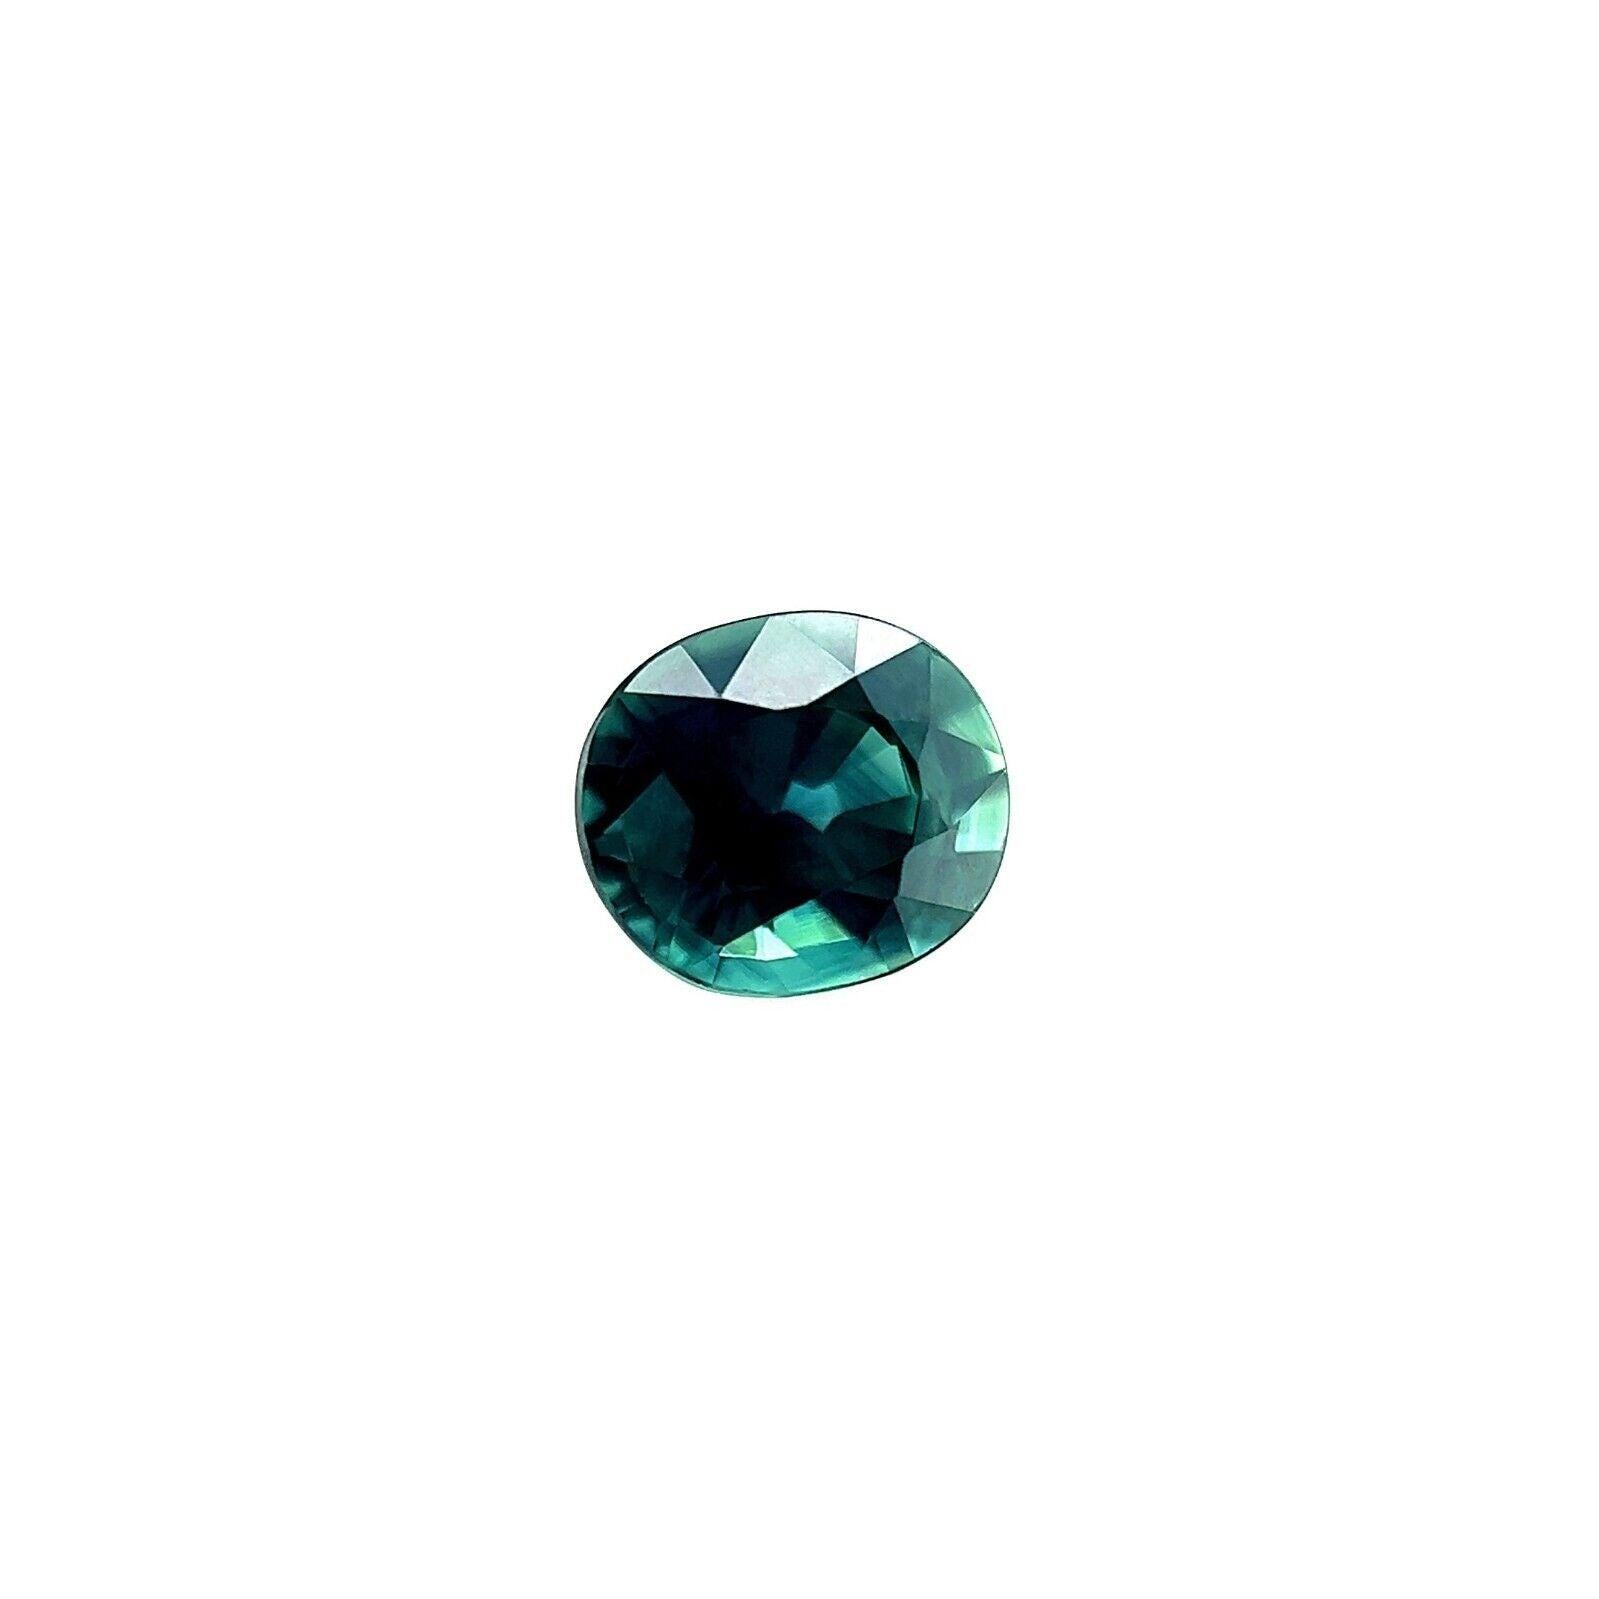 0.72ct Natural Vivid Blue Green Australian Sapphire Oval Cut Gem 6x5.2mm VVS

Natural Australian Deep Blue Green Sapphire Gemstone.
0.72 Carat with a beautiful and unique deep green blue colour and excellent clarity, a very clean stone.
Also has an